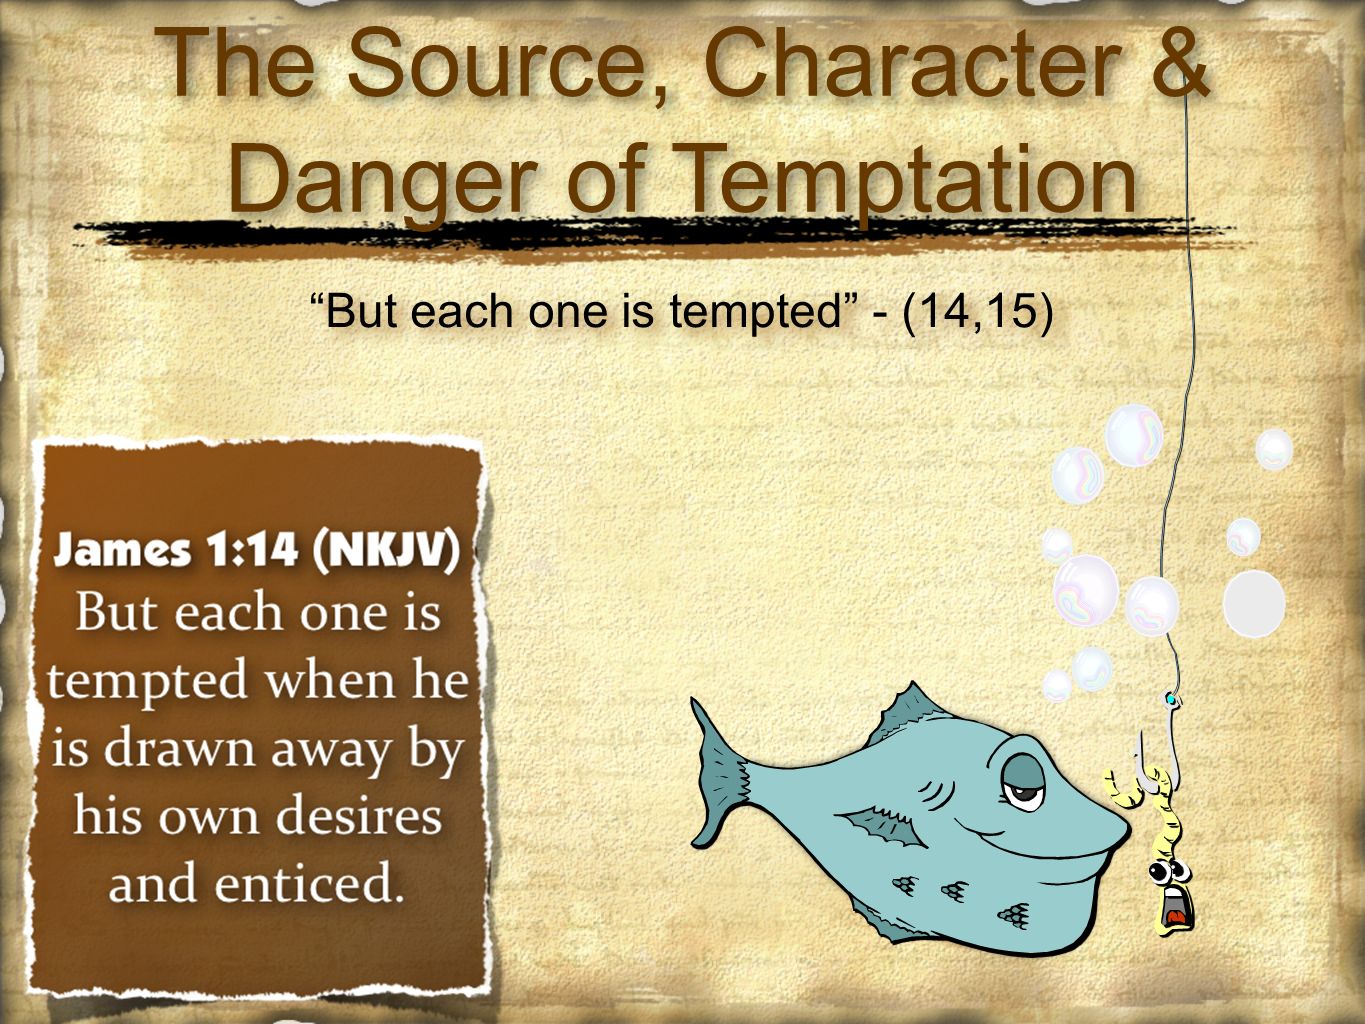 But each one is tempted - (14,15) The Source, Character & Danger of Temptation